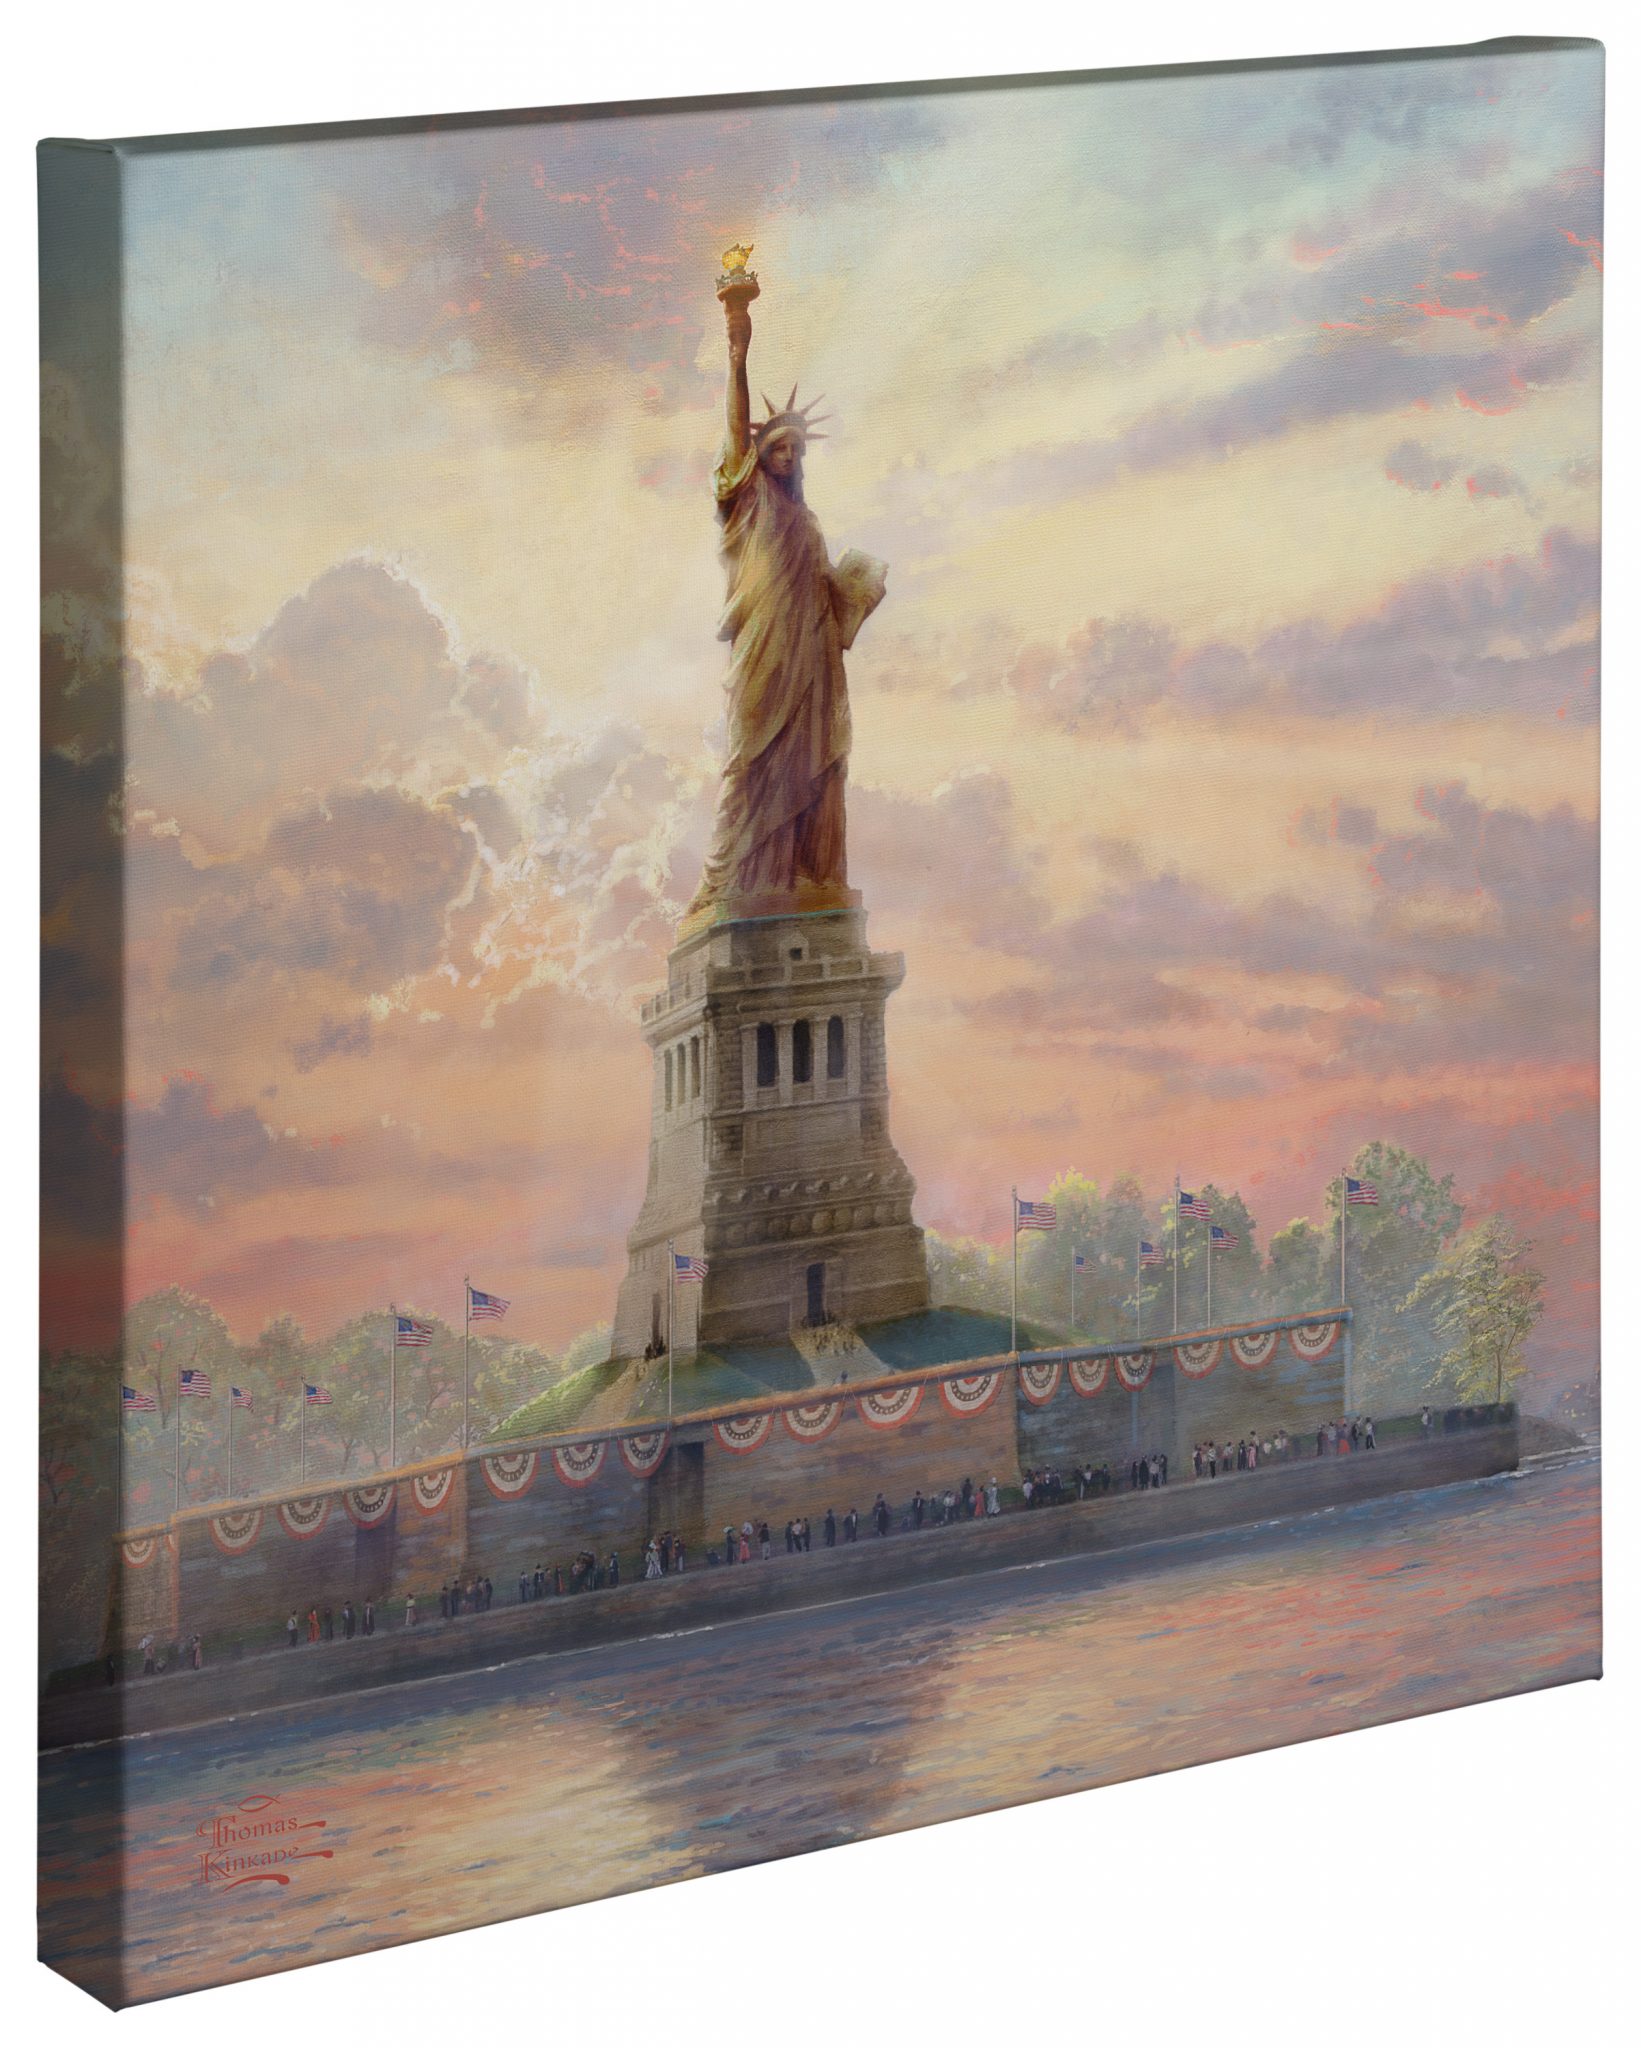 Dedicated to Liberty - 20" x 20" Gallery Wrapped Canvas